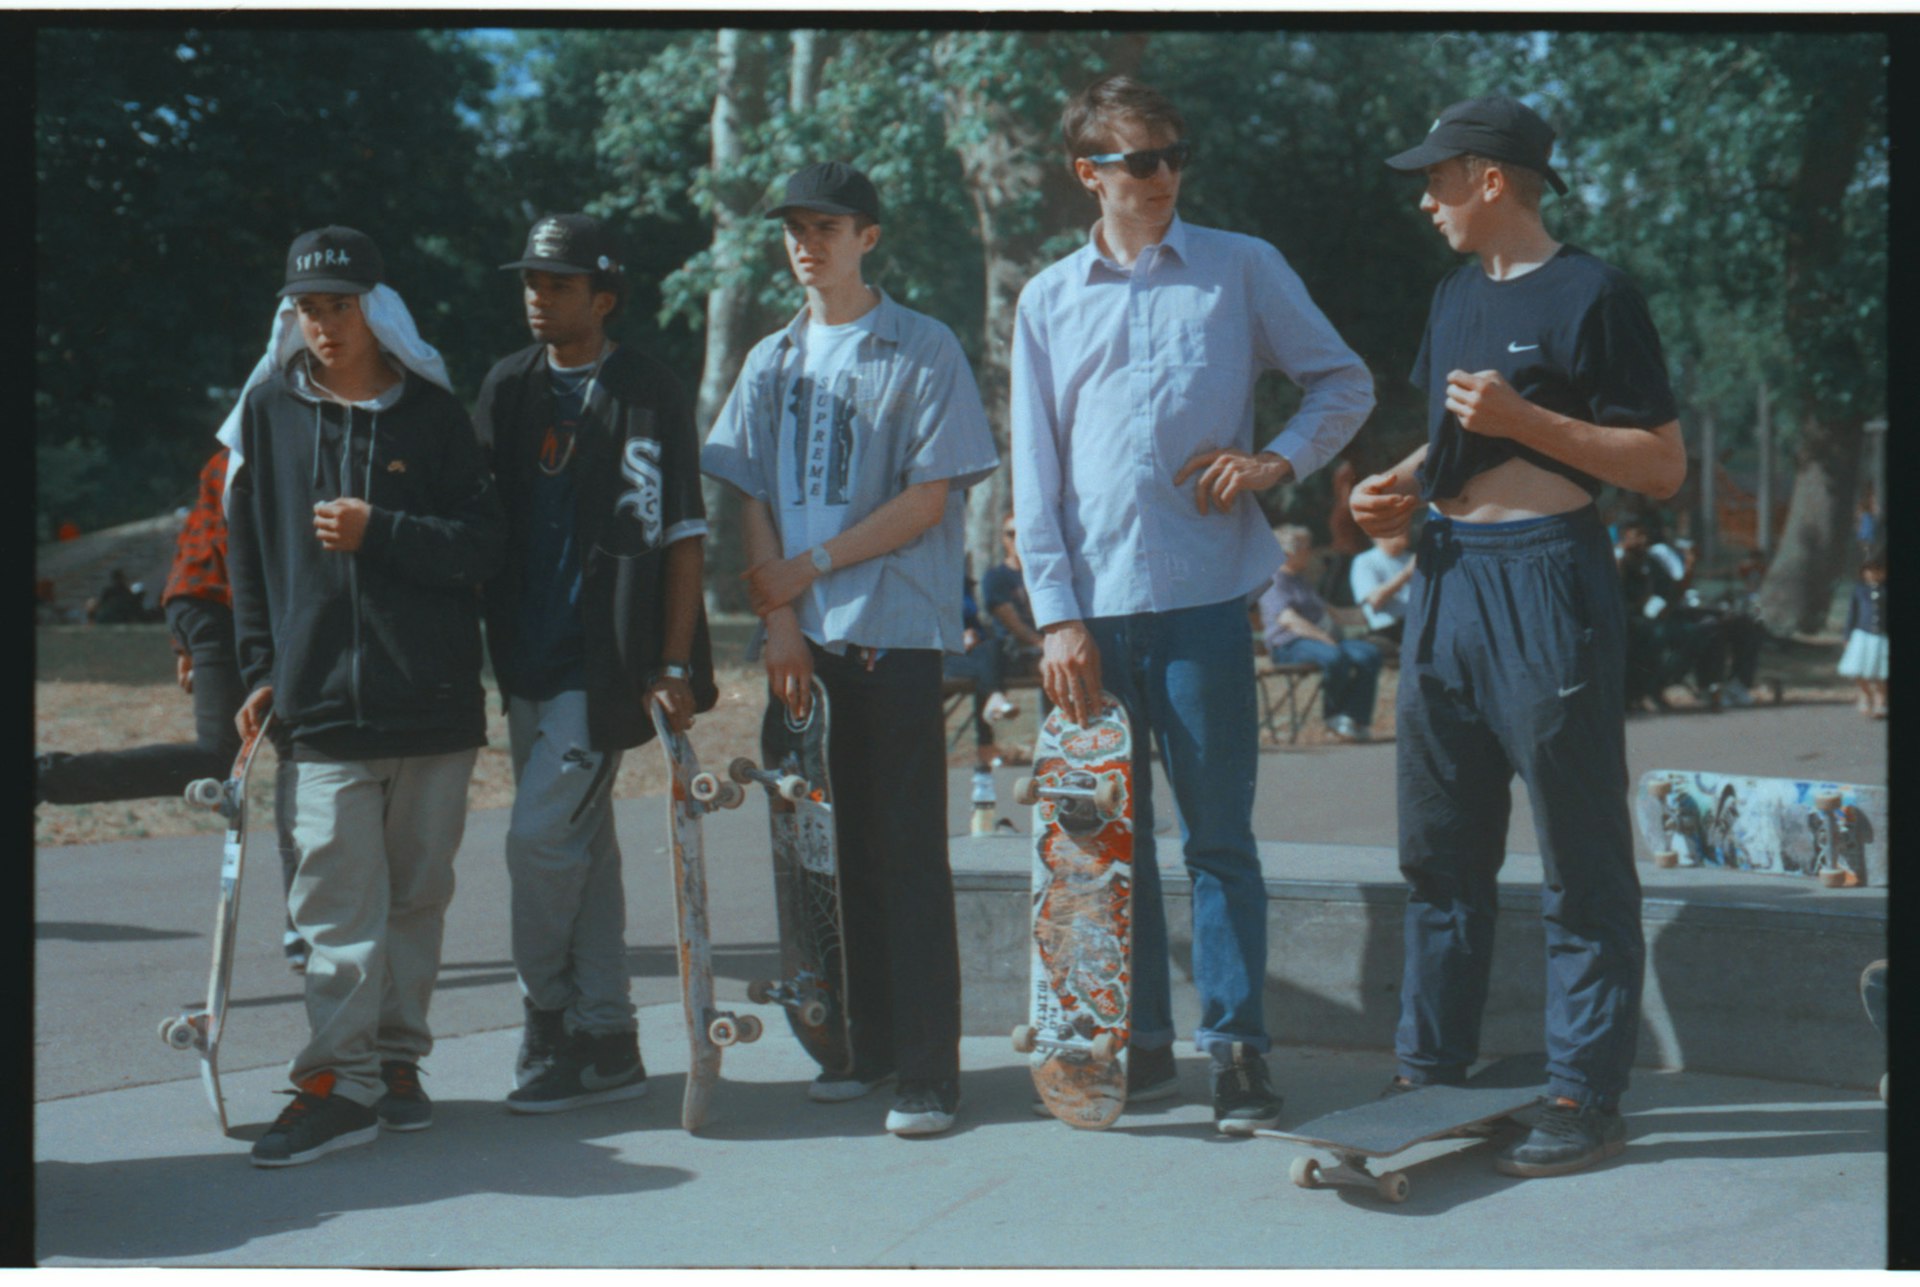 A short film trilogy about skate comps in Europe